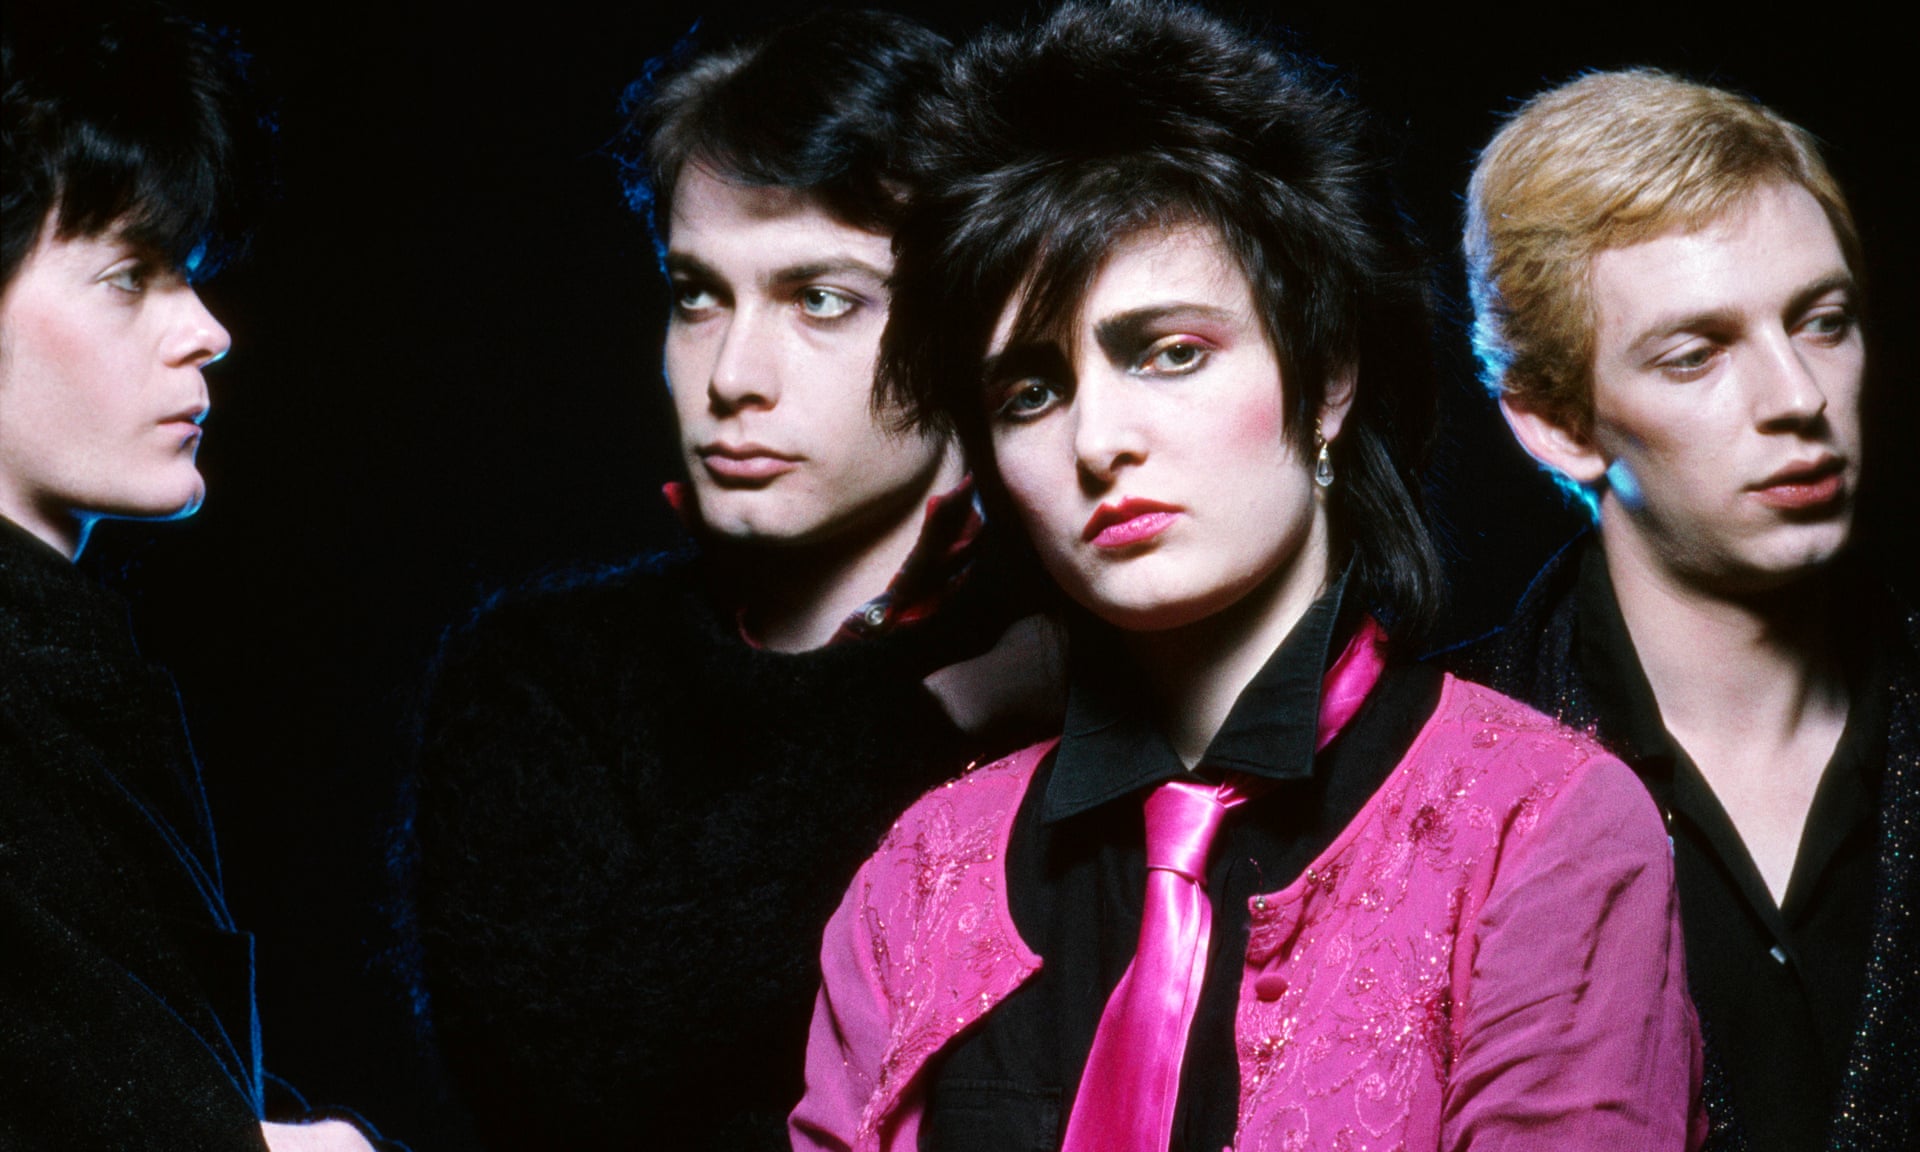 Siouxsie Sioux and the Banshees